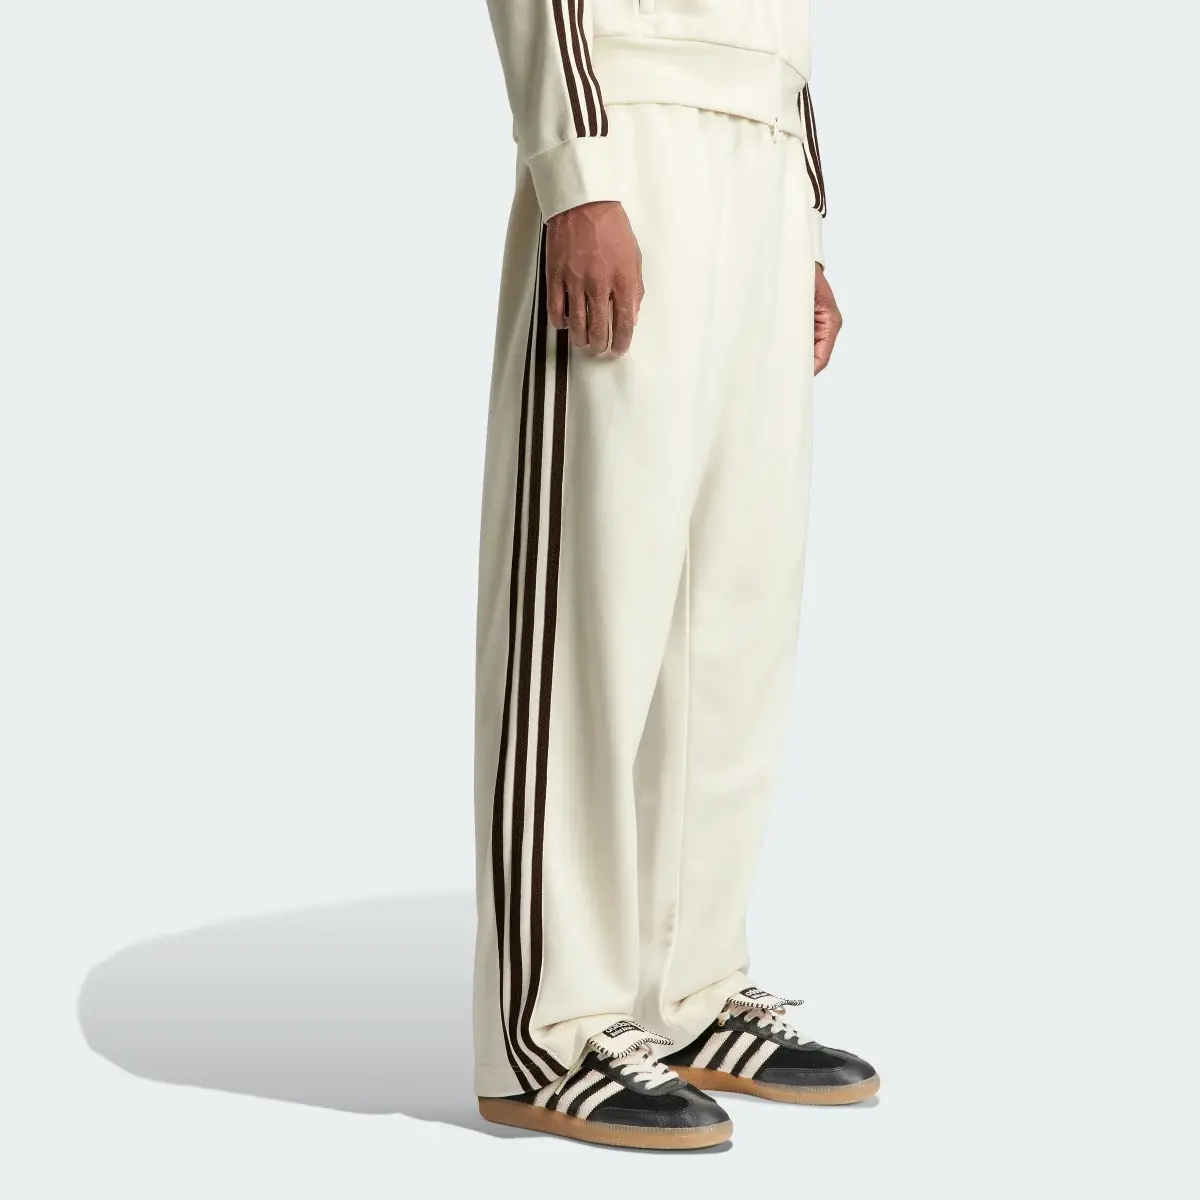 Adidas Statement Track Suit Joggers. 3